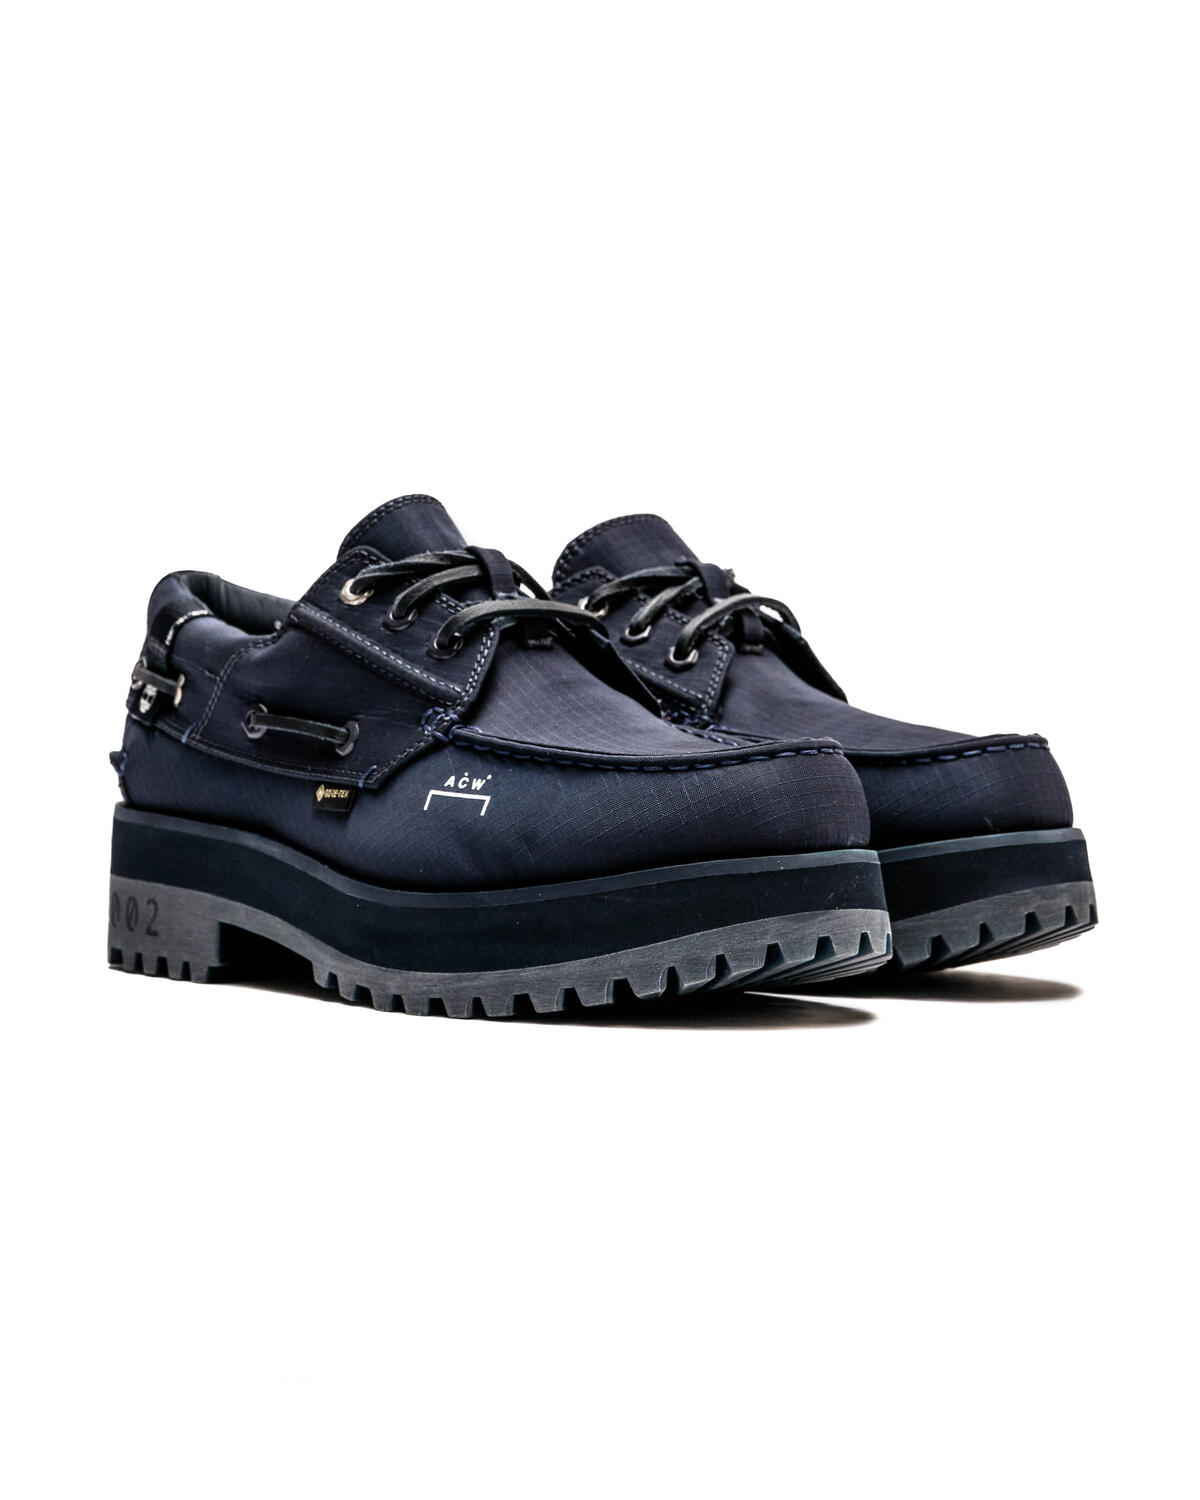 AFEW Authentic Timberland | TB0A683Y4331 BOAT STORE | A-COLD-WALL* x SHOE